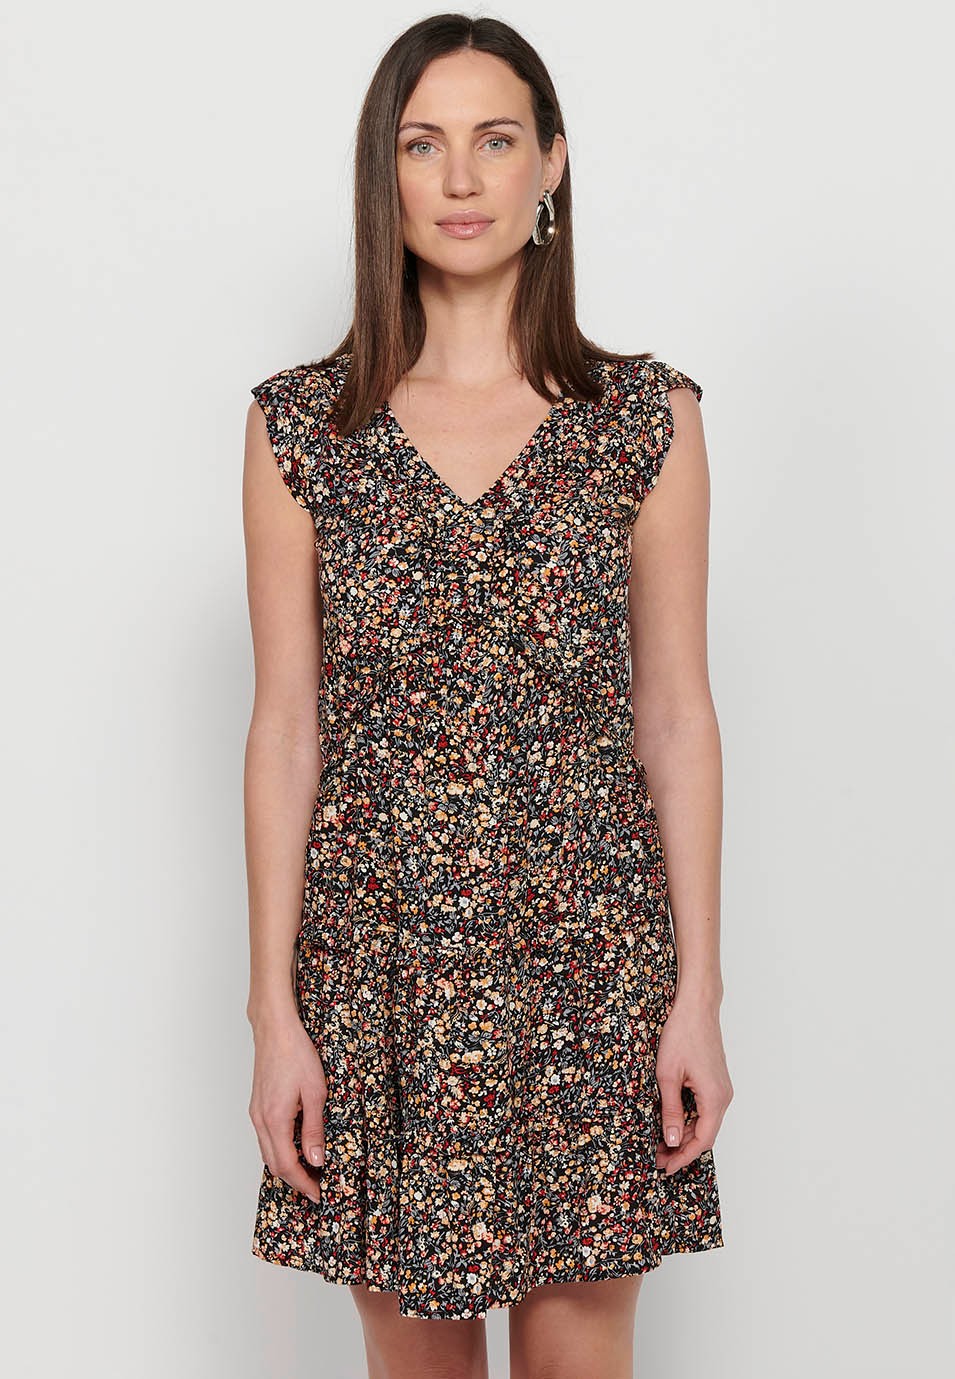 Short sleeveless dress with ruffle detail on the shoulders with V-neckline and Multicolor floral print for Women 1